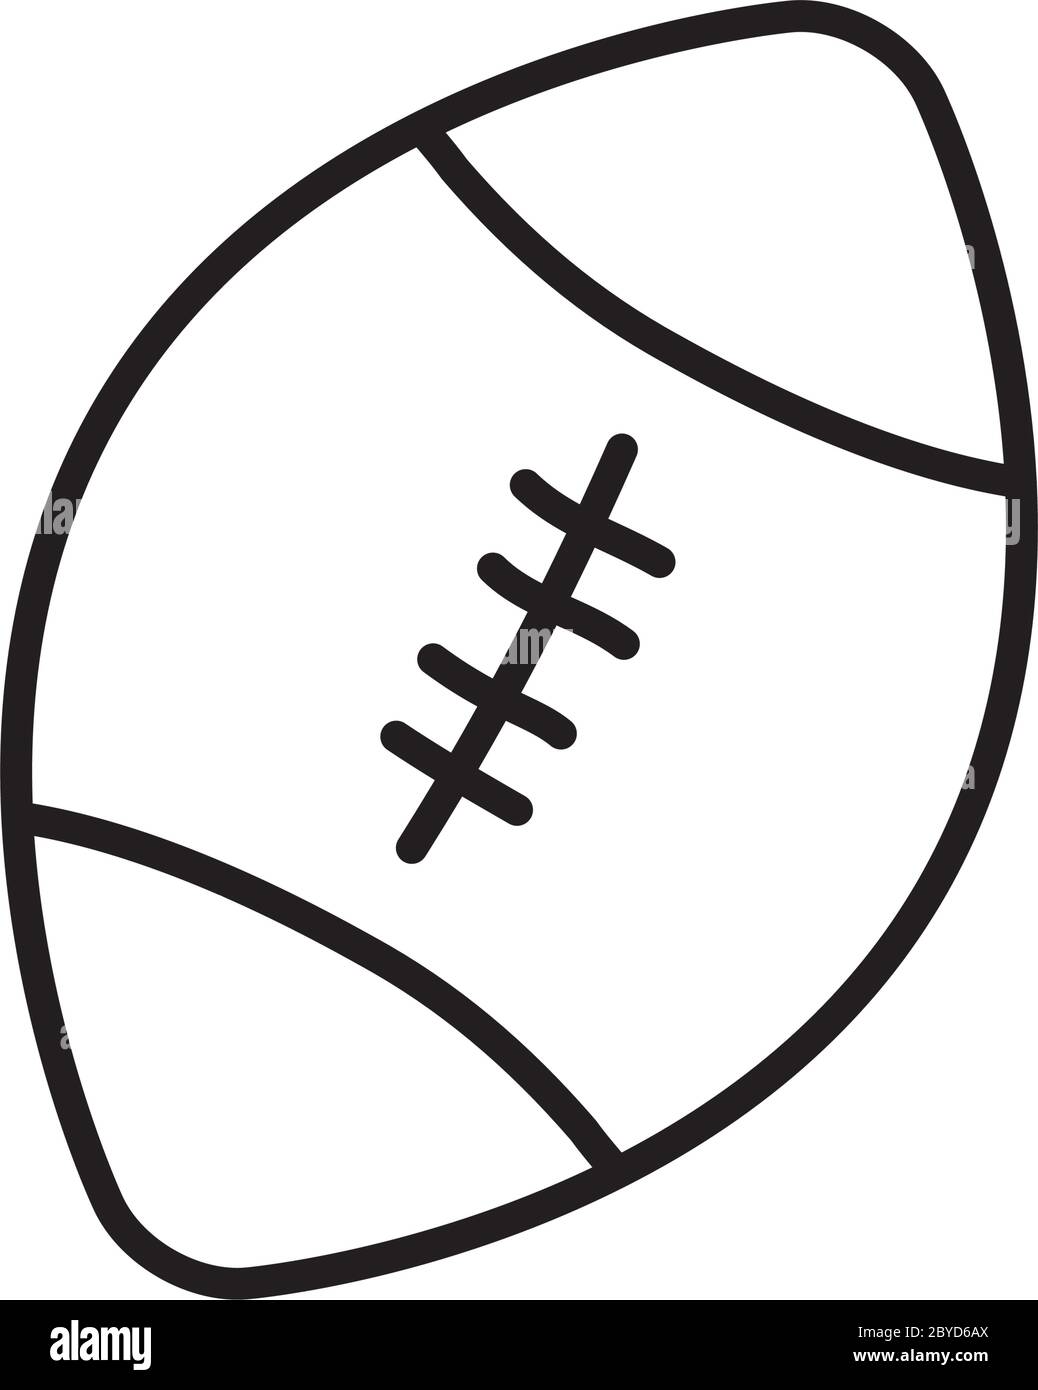 american football ball icon over white background, line style, vector illustration Stock Vector